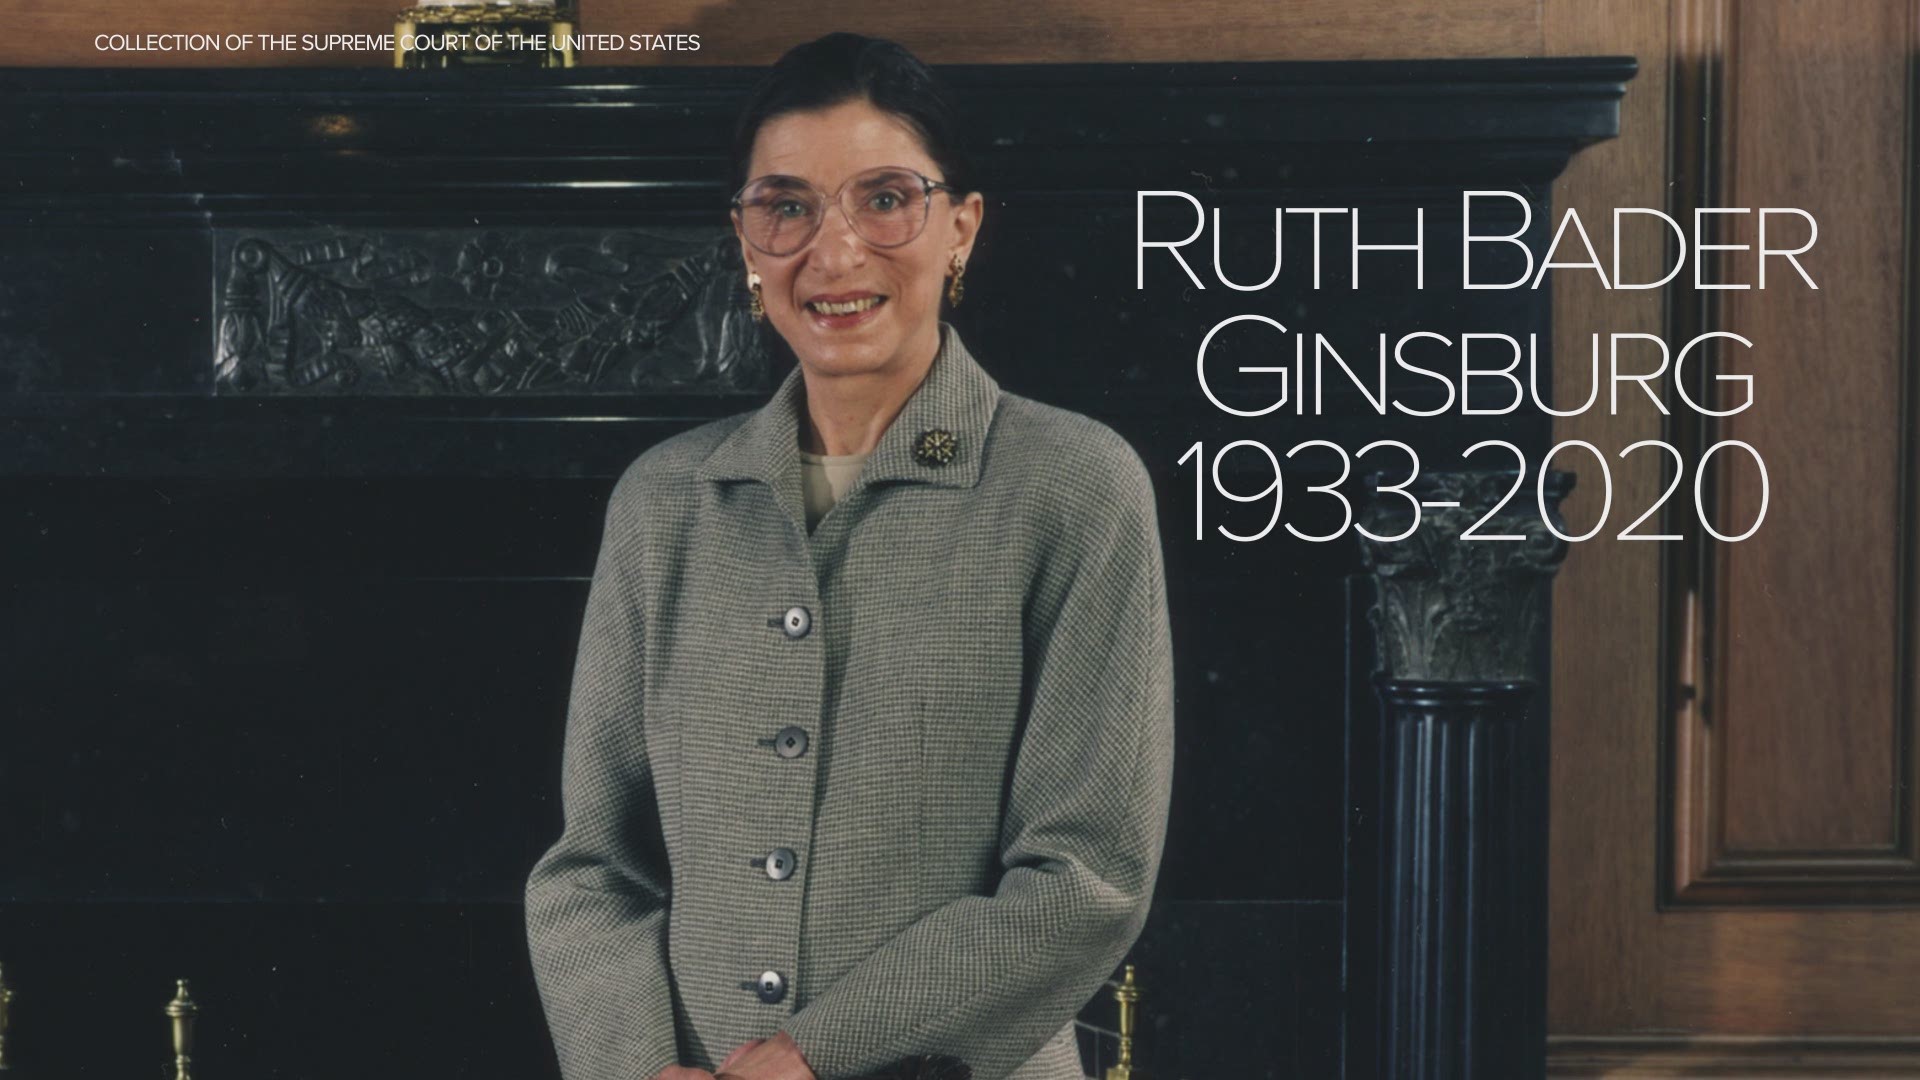 Supreme Court Justice Ruth Bader Ginsburg, a diminutive yet towering women’s rights champion who became the high court’s second female justice, has died.